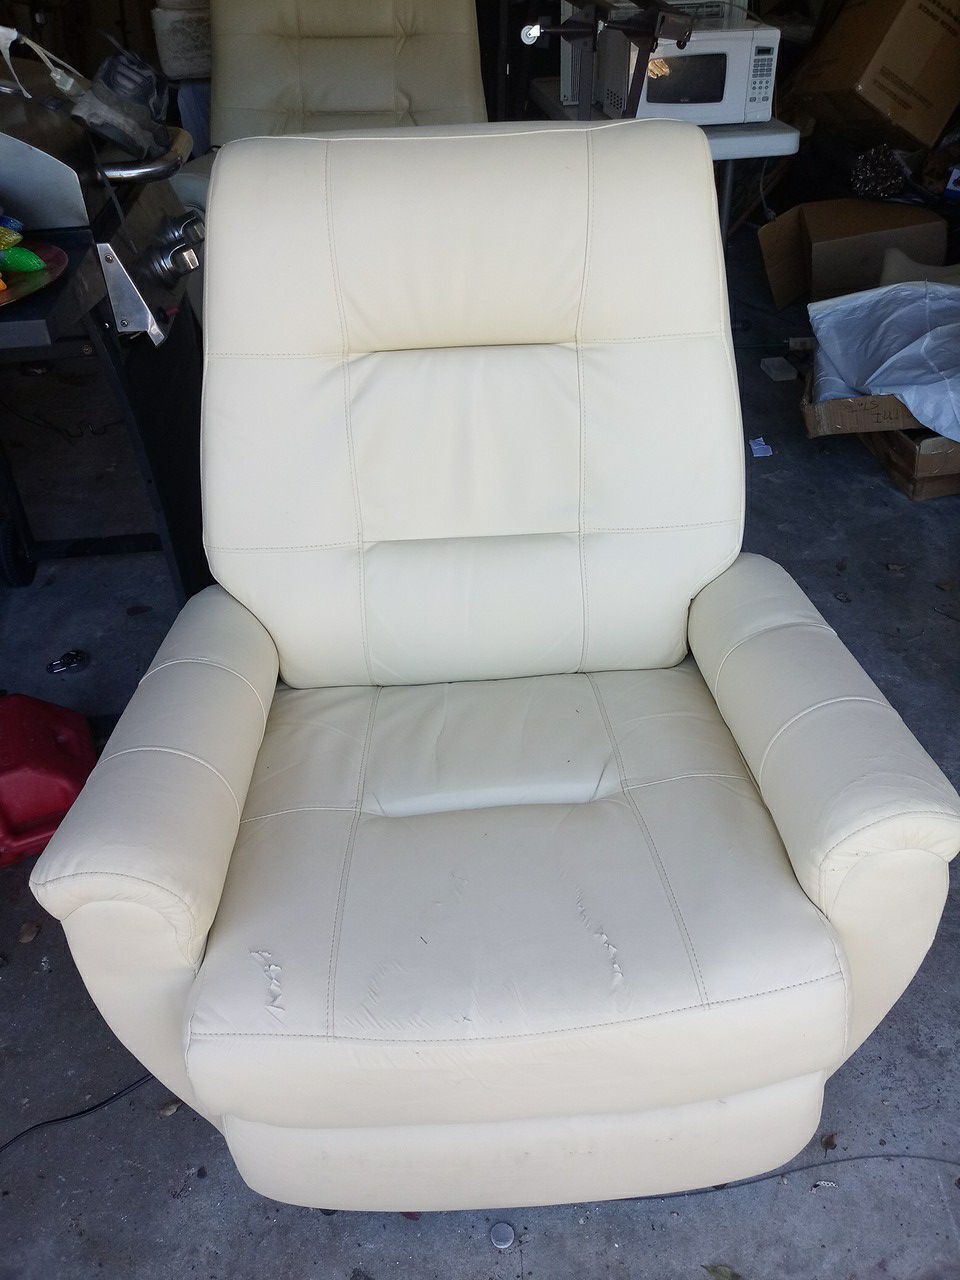 Leather Touch button remote recliner $15